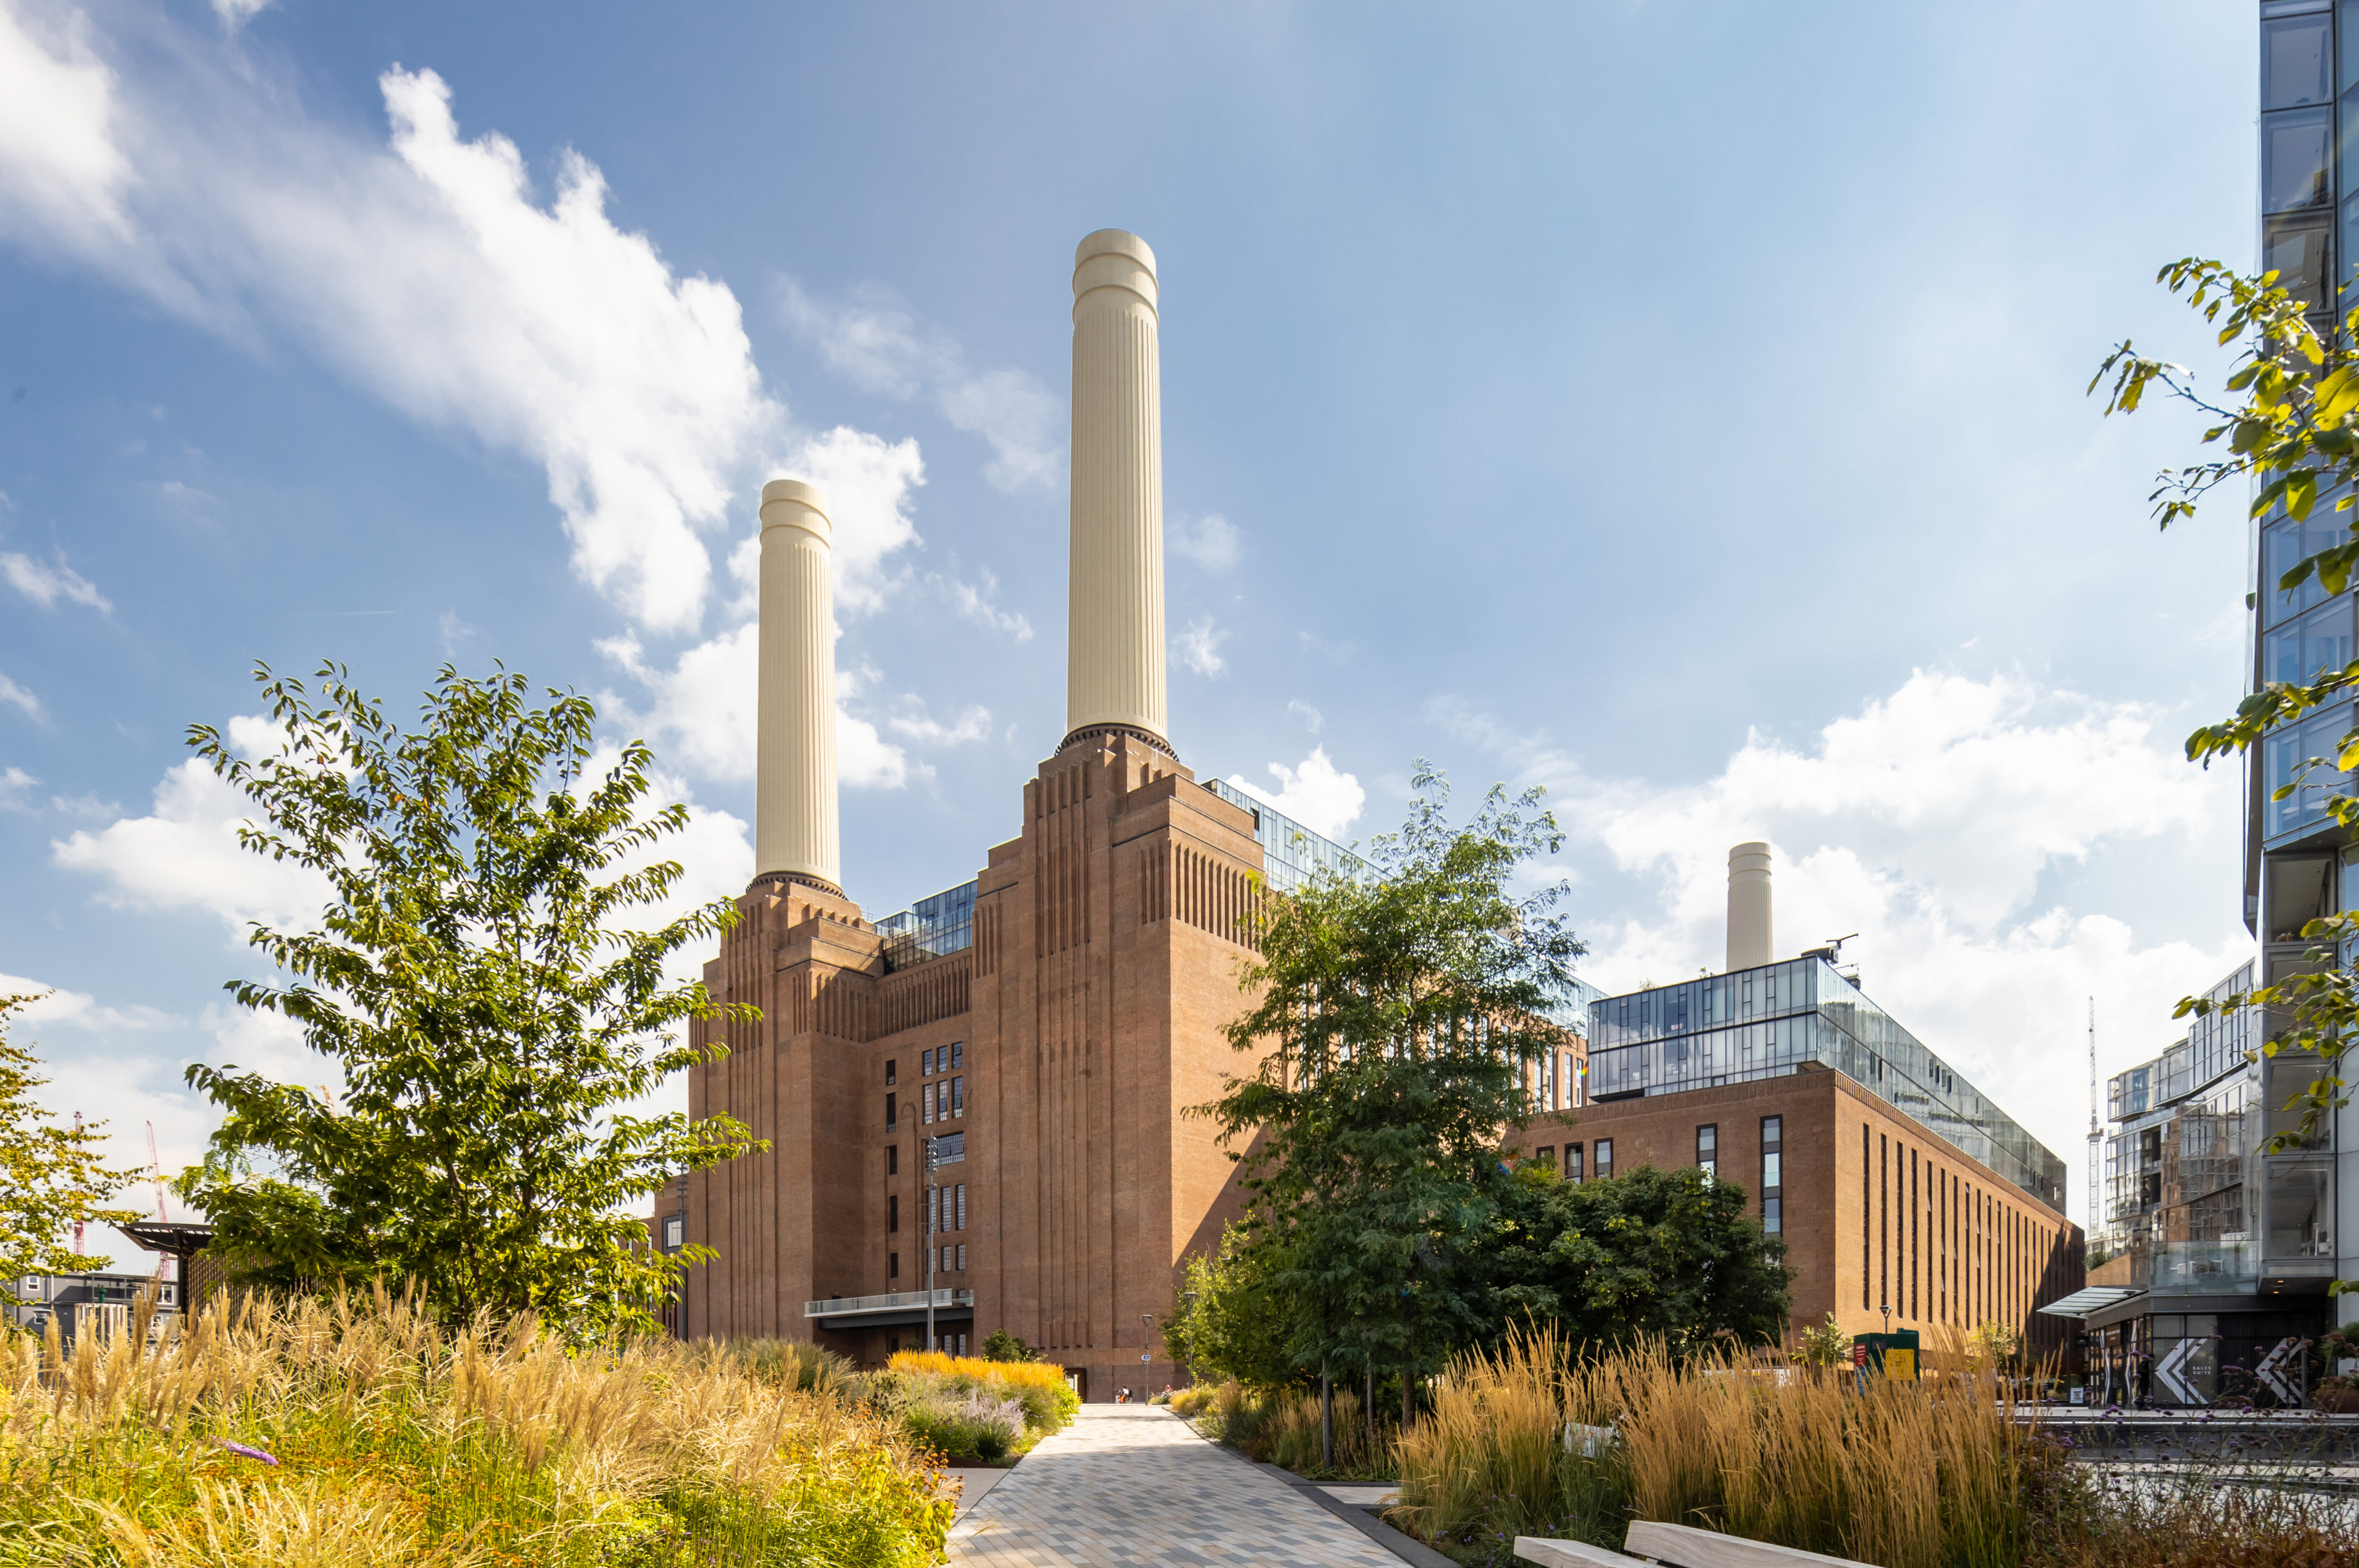 London’s iconic Battersea Power Station will reopen as a luxury retail and leisure destination after lying dormant for 40 years. Photo: John Sturrock